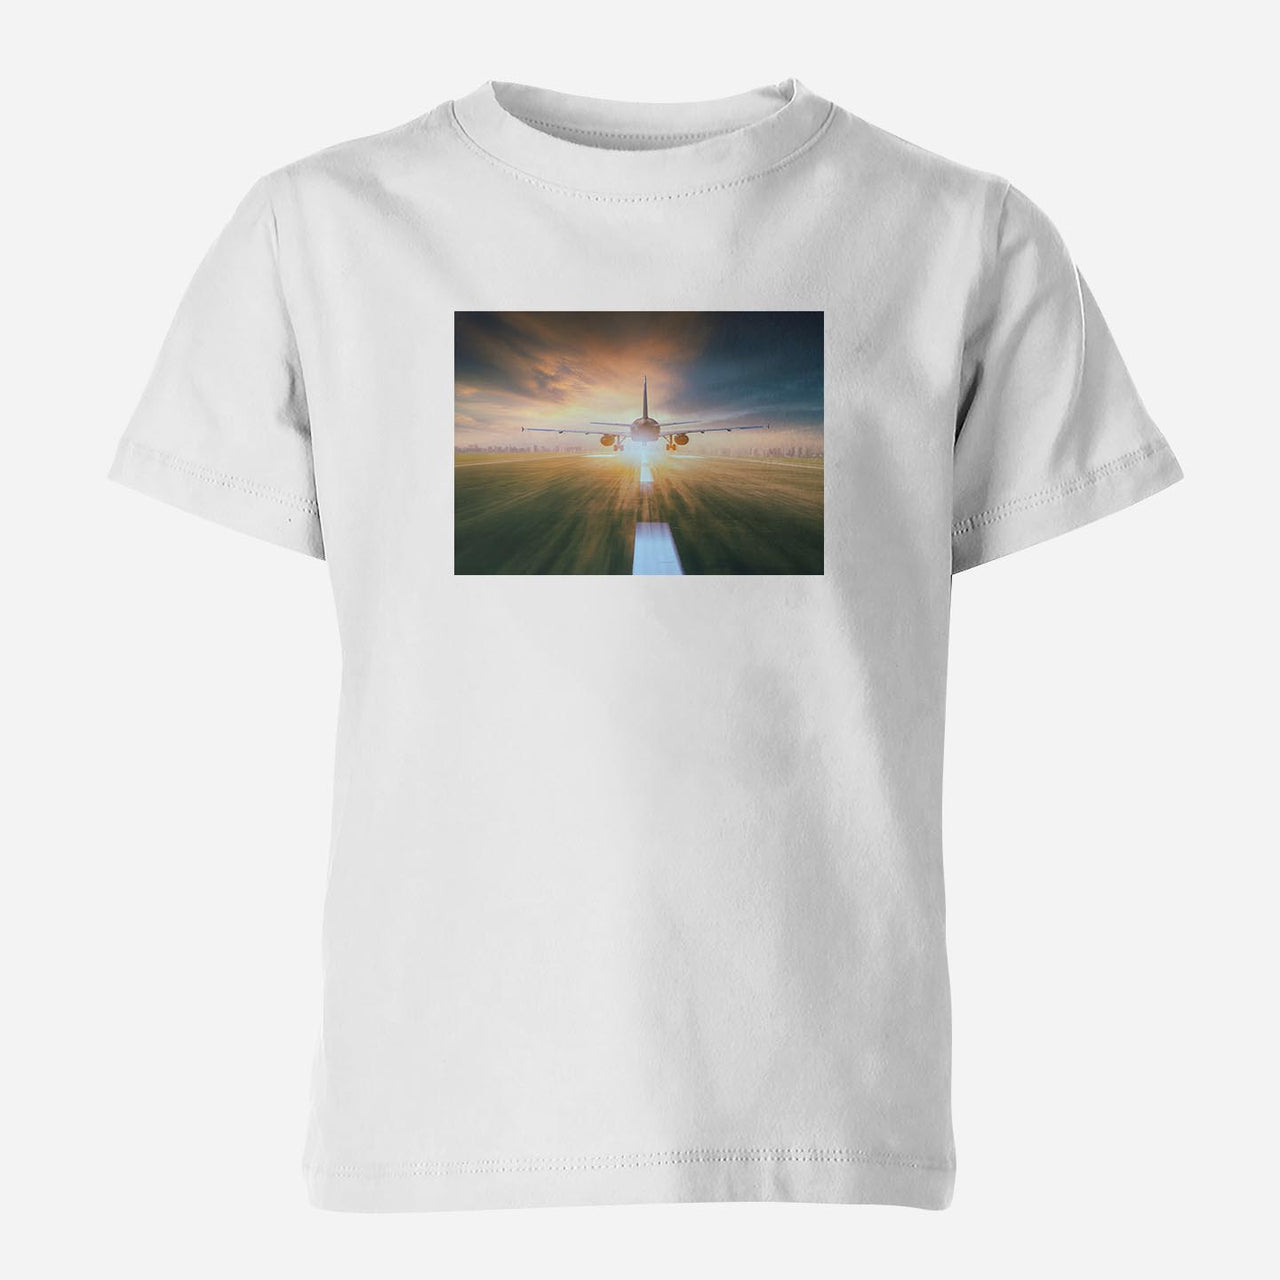 Airplane Flying Over Runway Designed Children T-Shirts